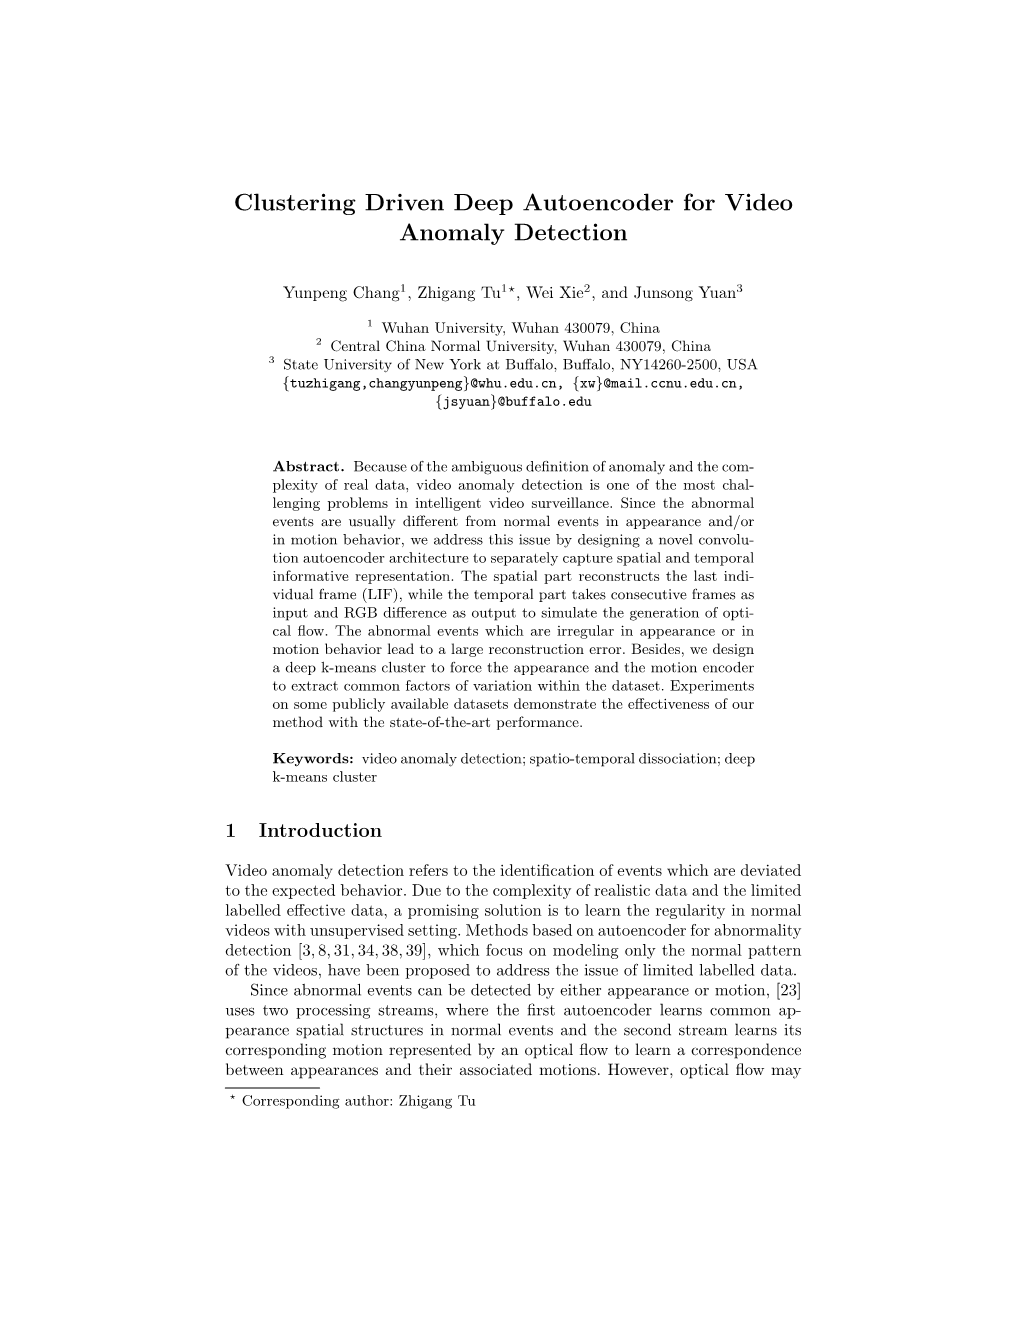 Clustering Driven Deep Autoencoder for Video Anomaly Detection